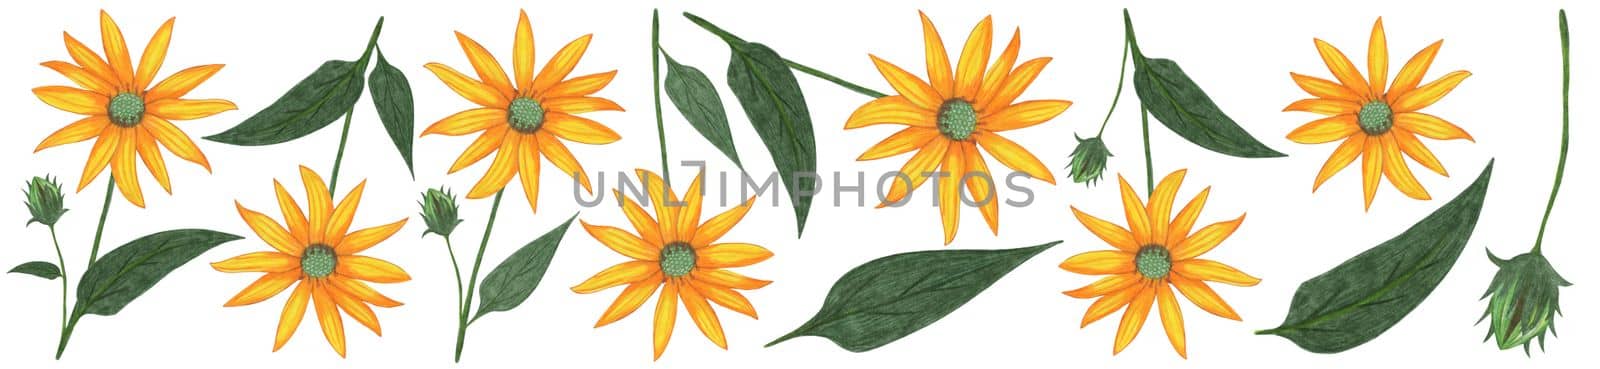 Set of Hand Drawn Yellow Flower with Green Leaves Isolated on White Background. by Rina_Dozornaya